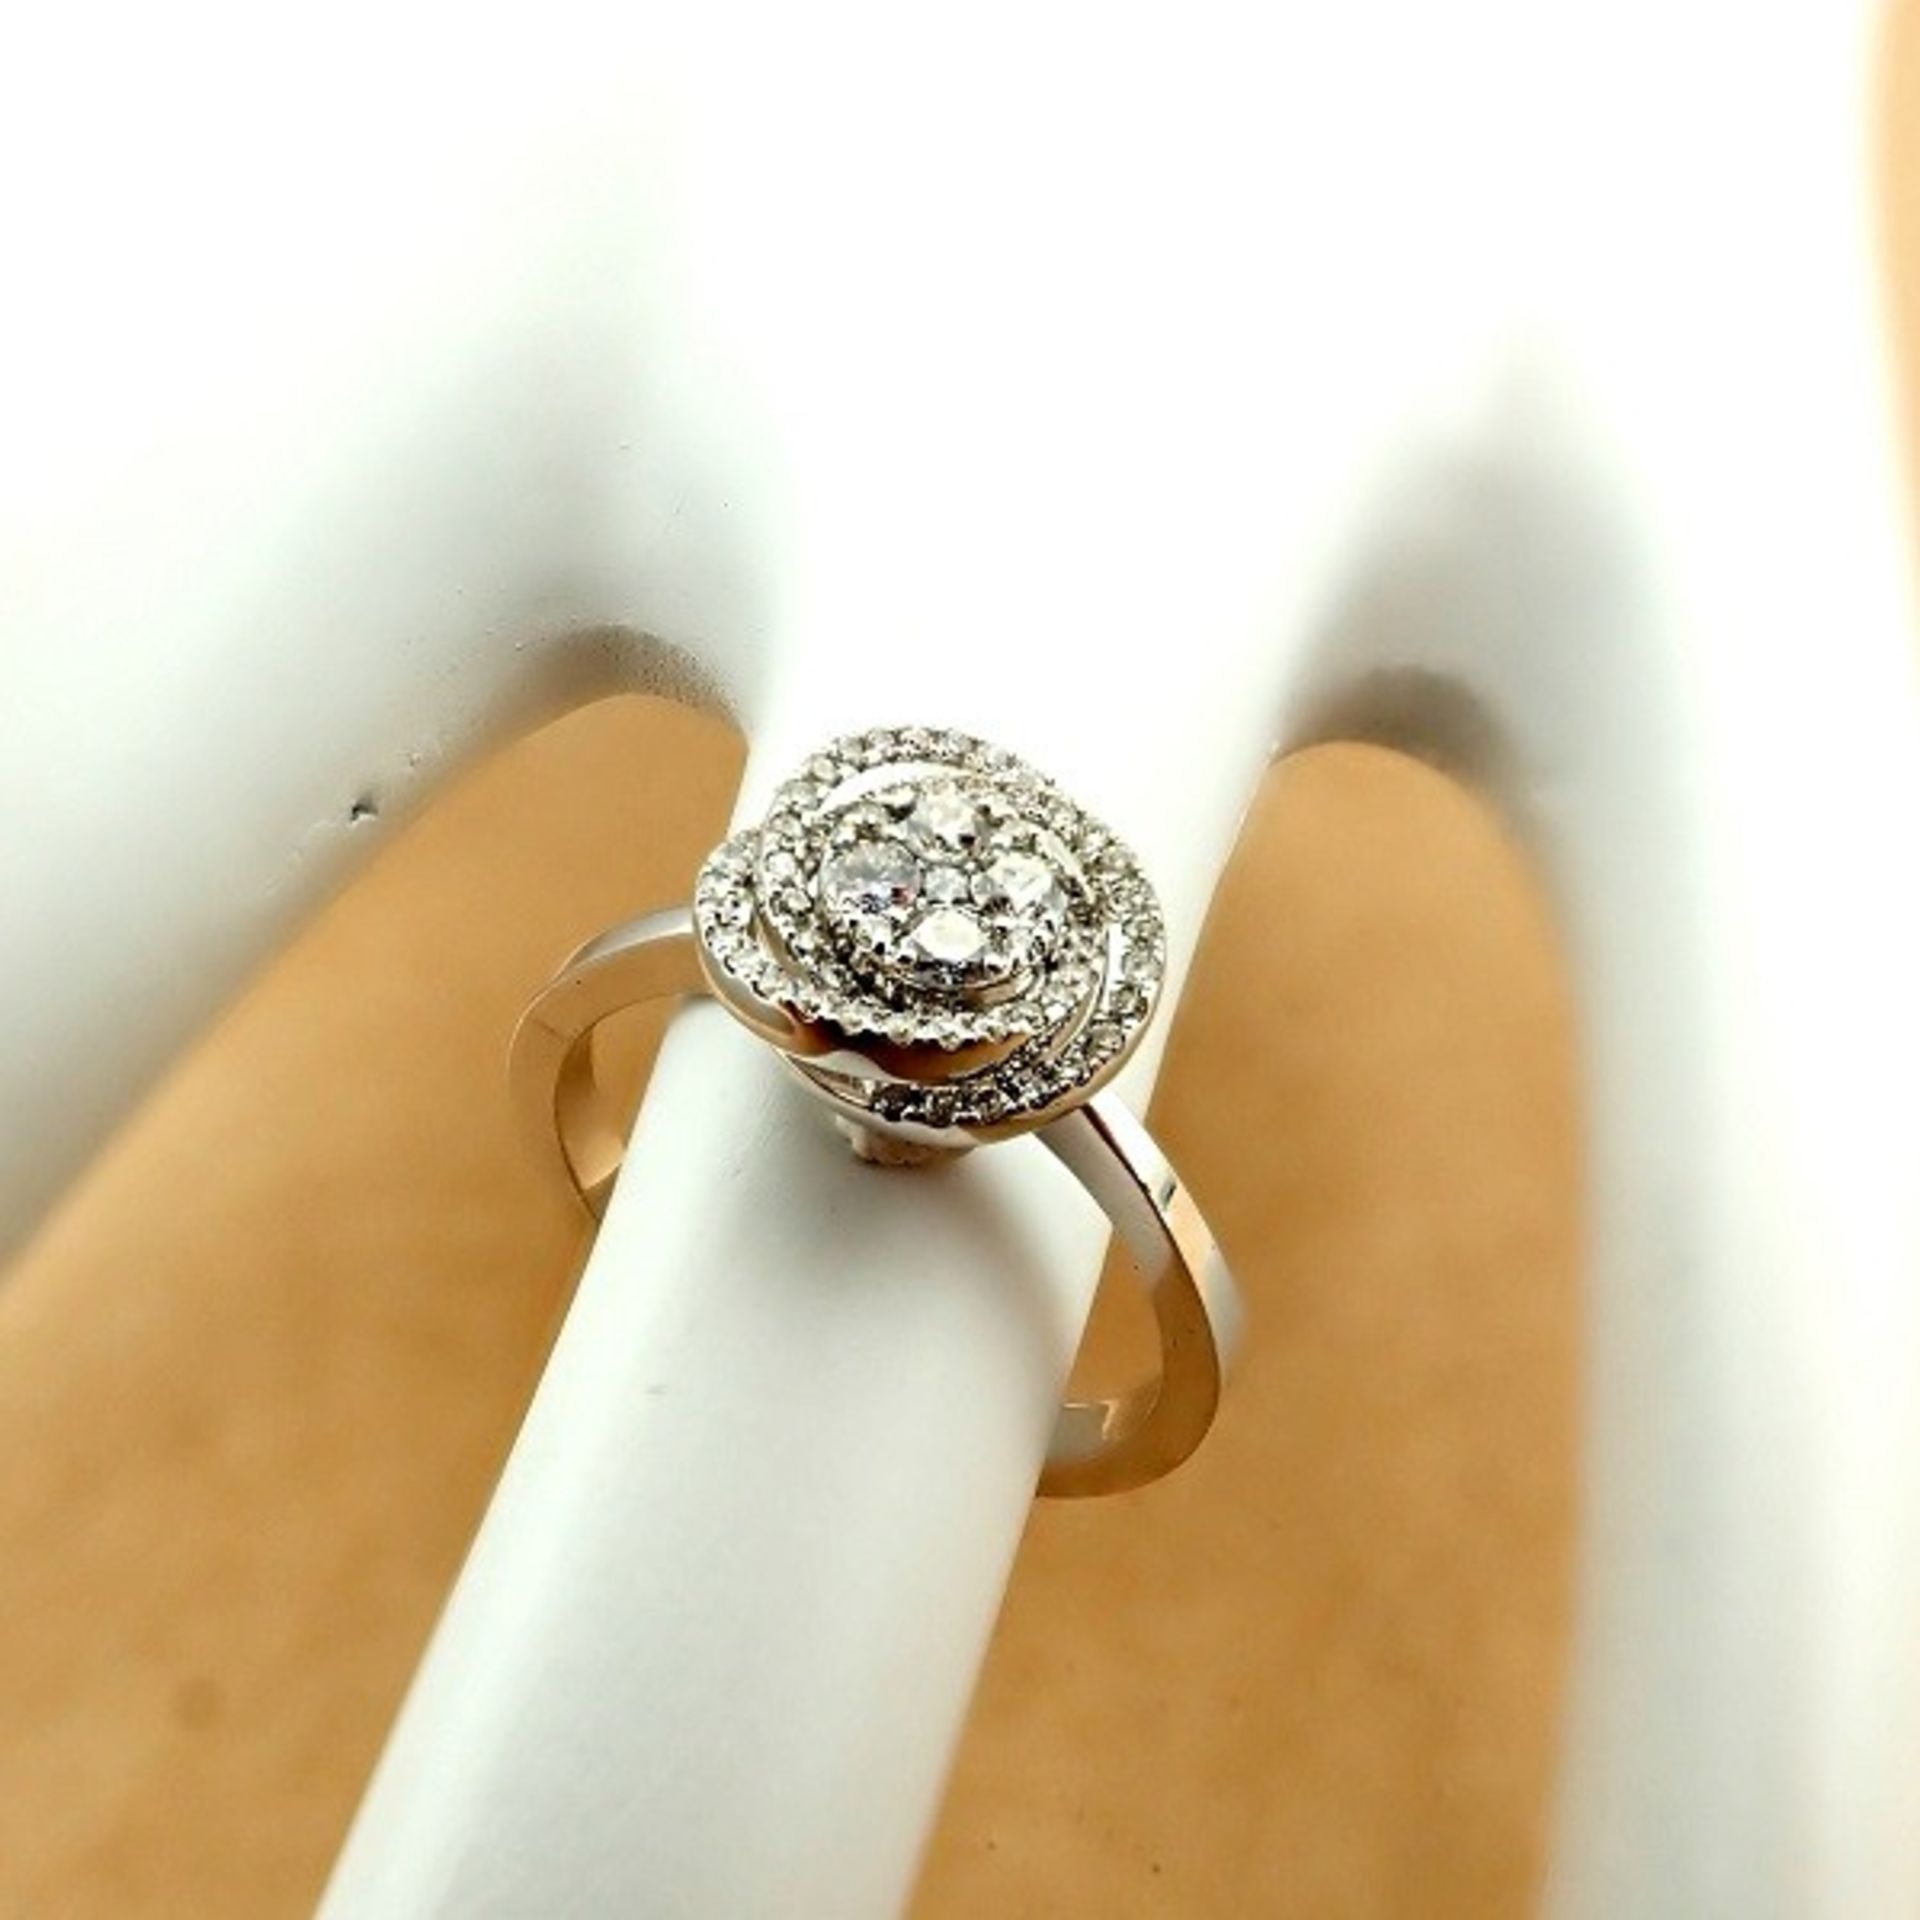 Certificated 14K White Gold Diamond Ring - Image 6 of 7